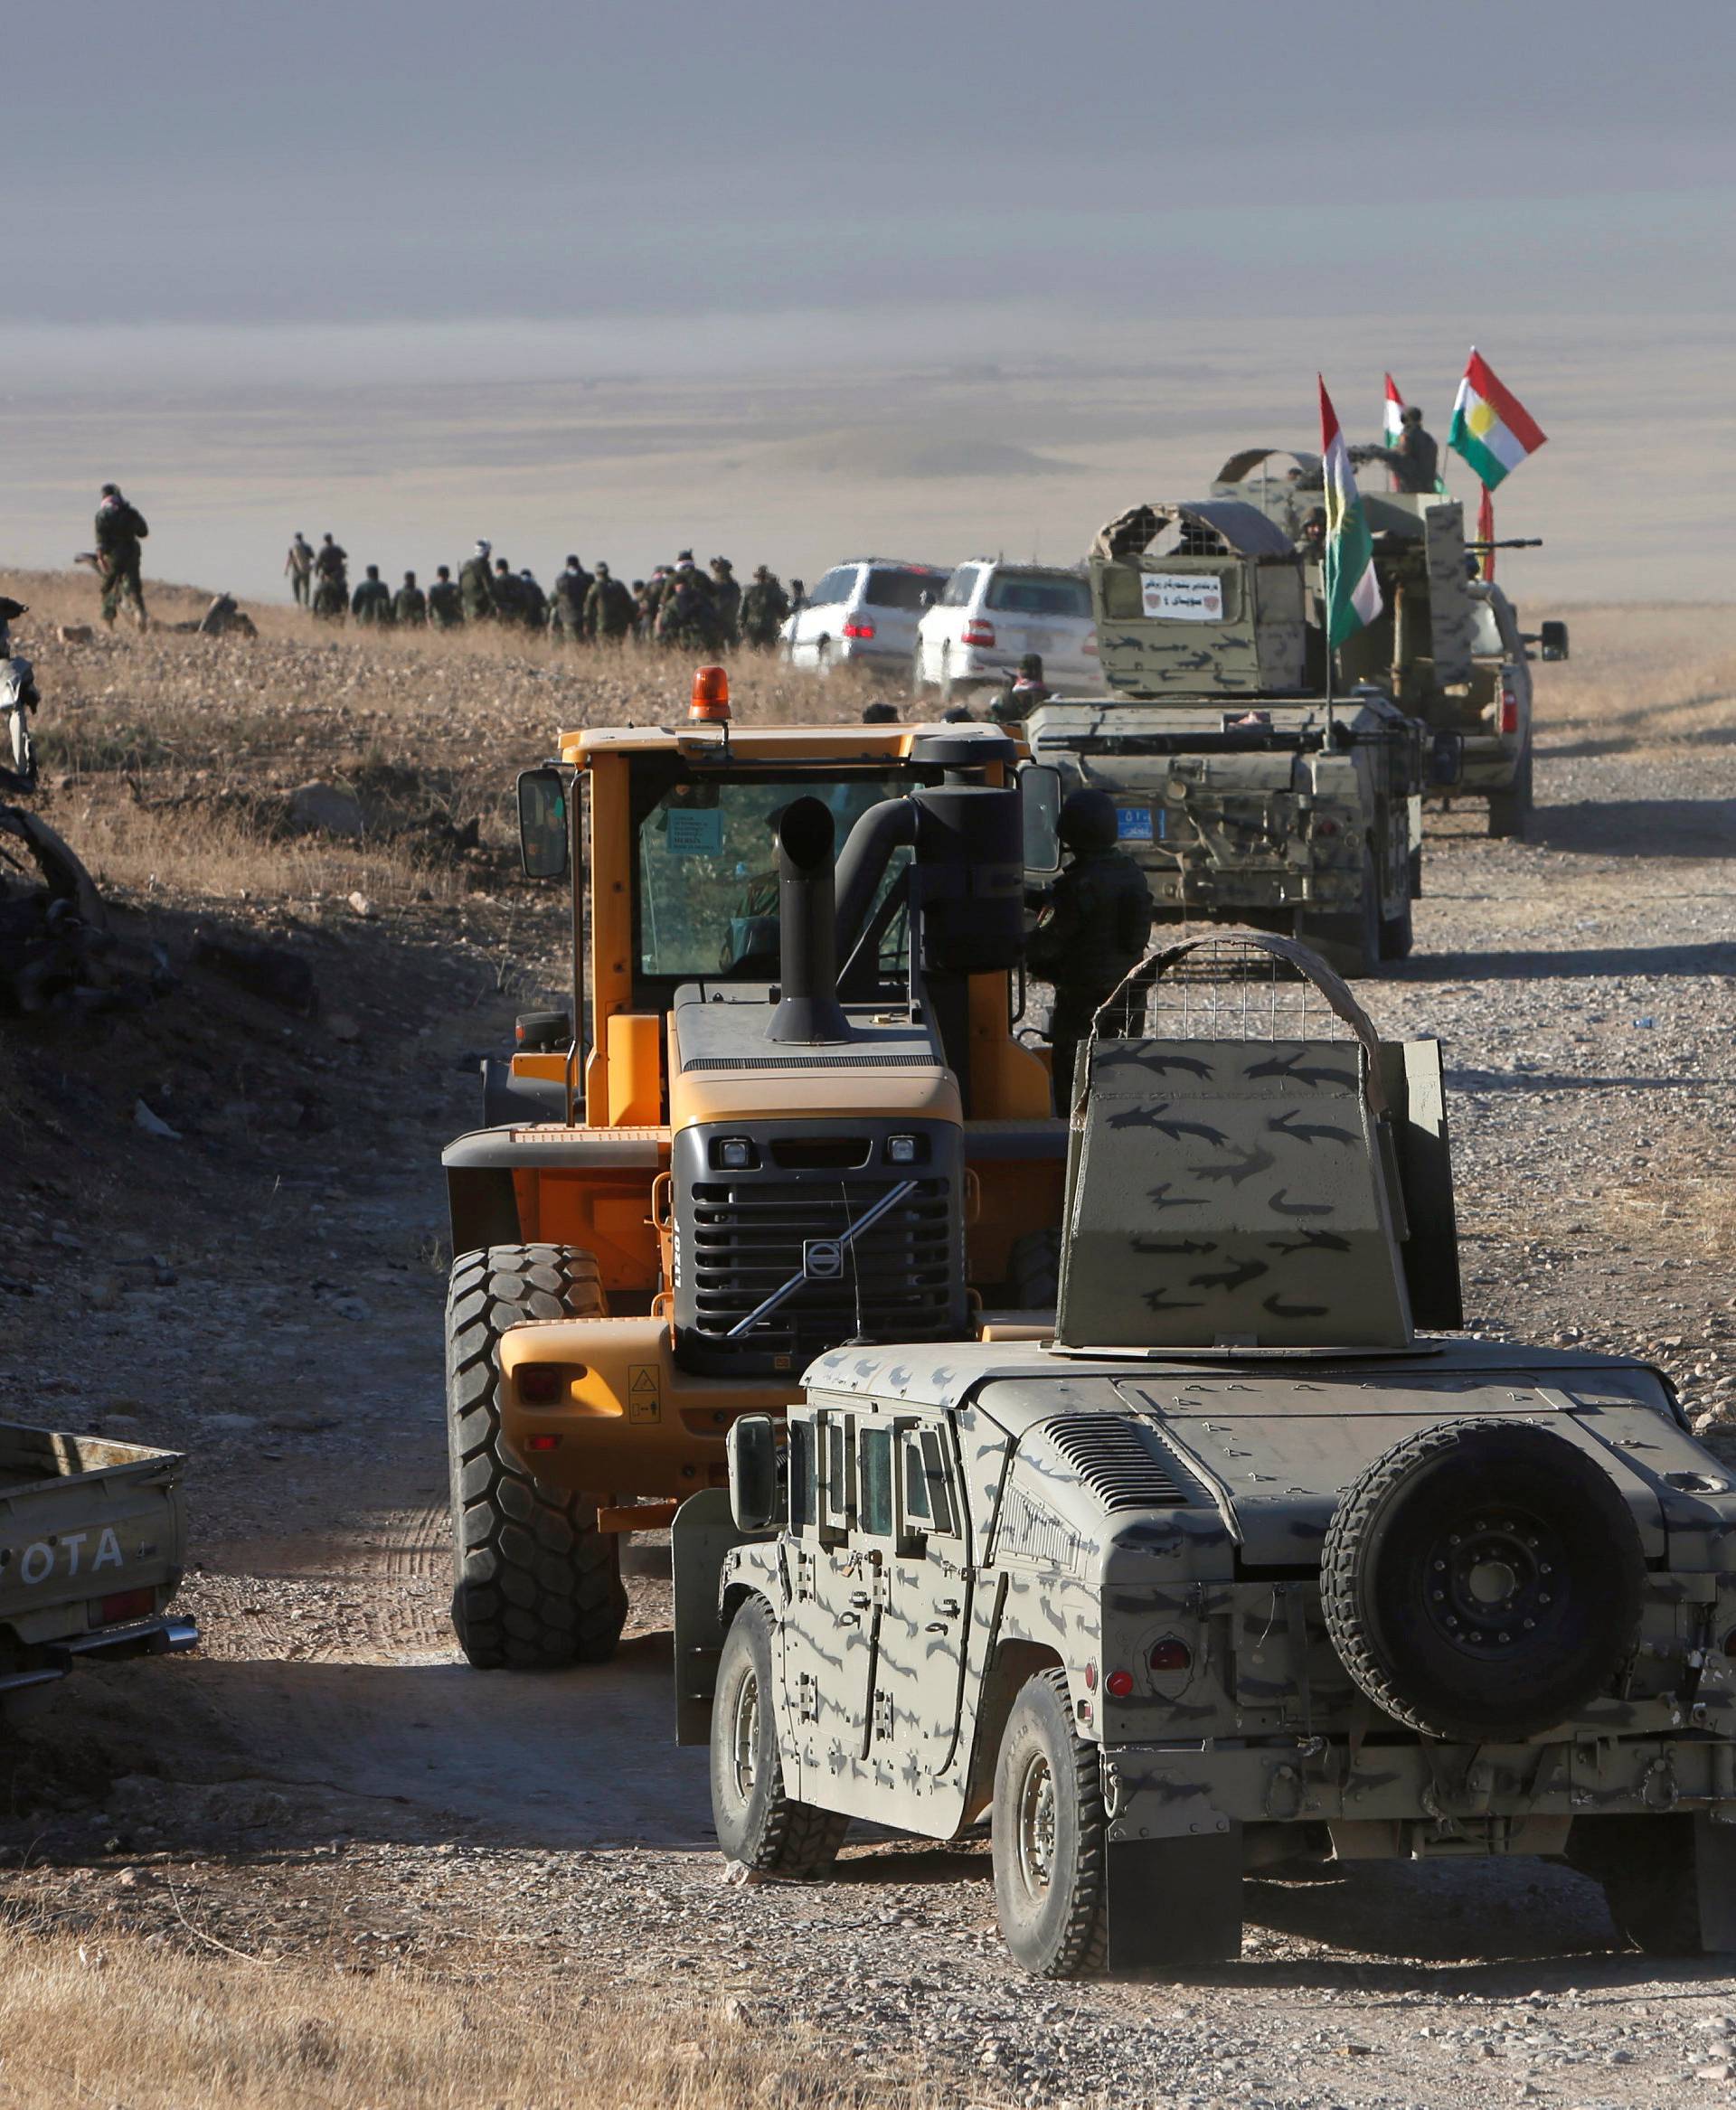 Peshmerga forces advance in the east of Mosul to attack Islamic State militants in Mosul